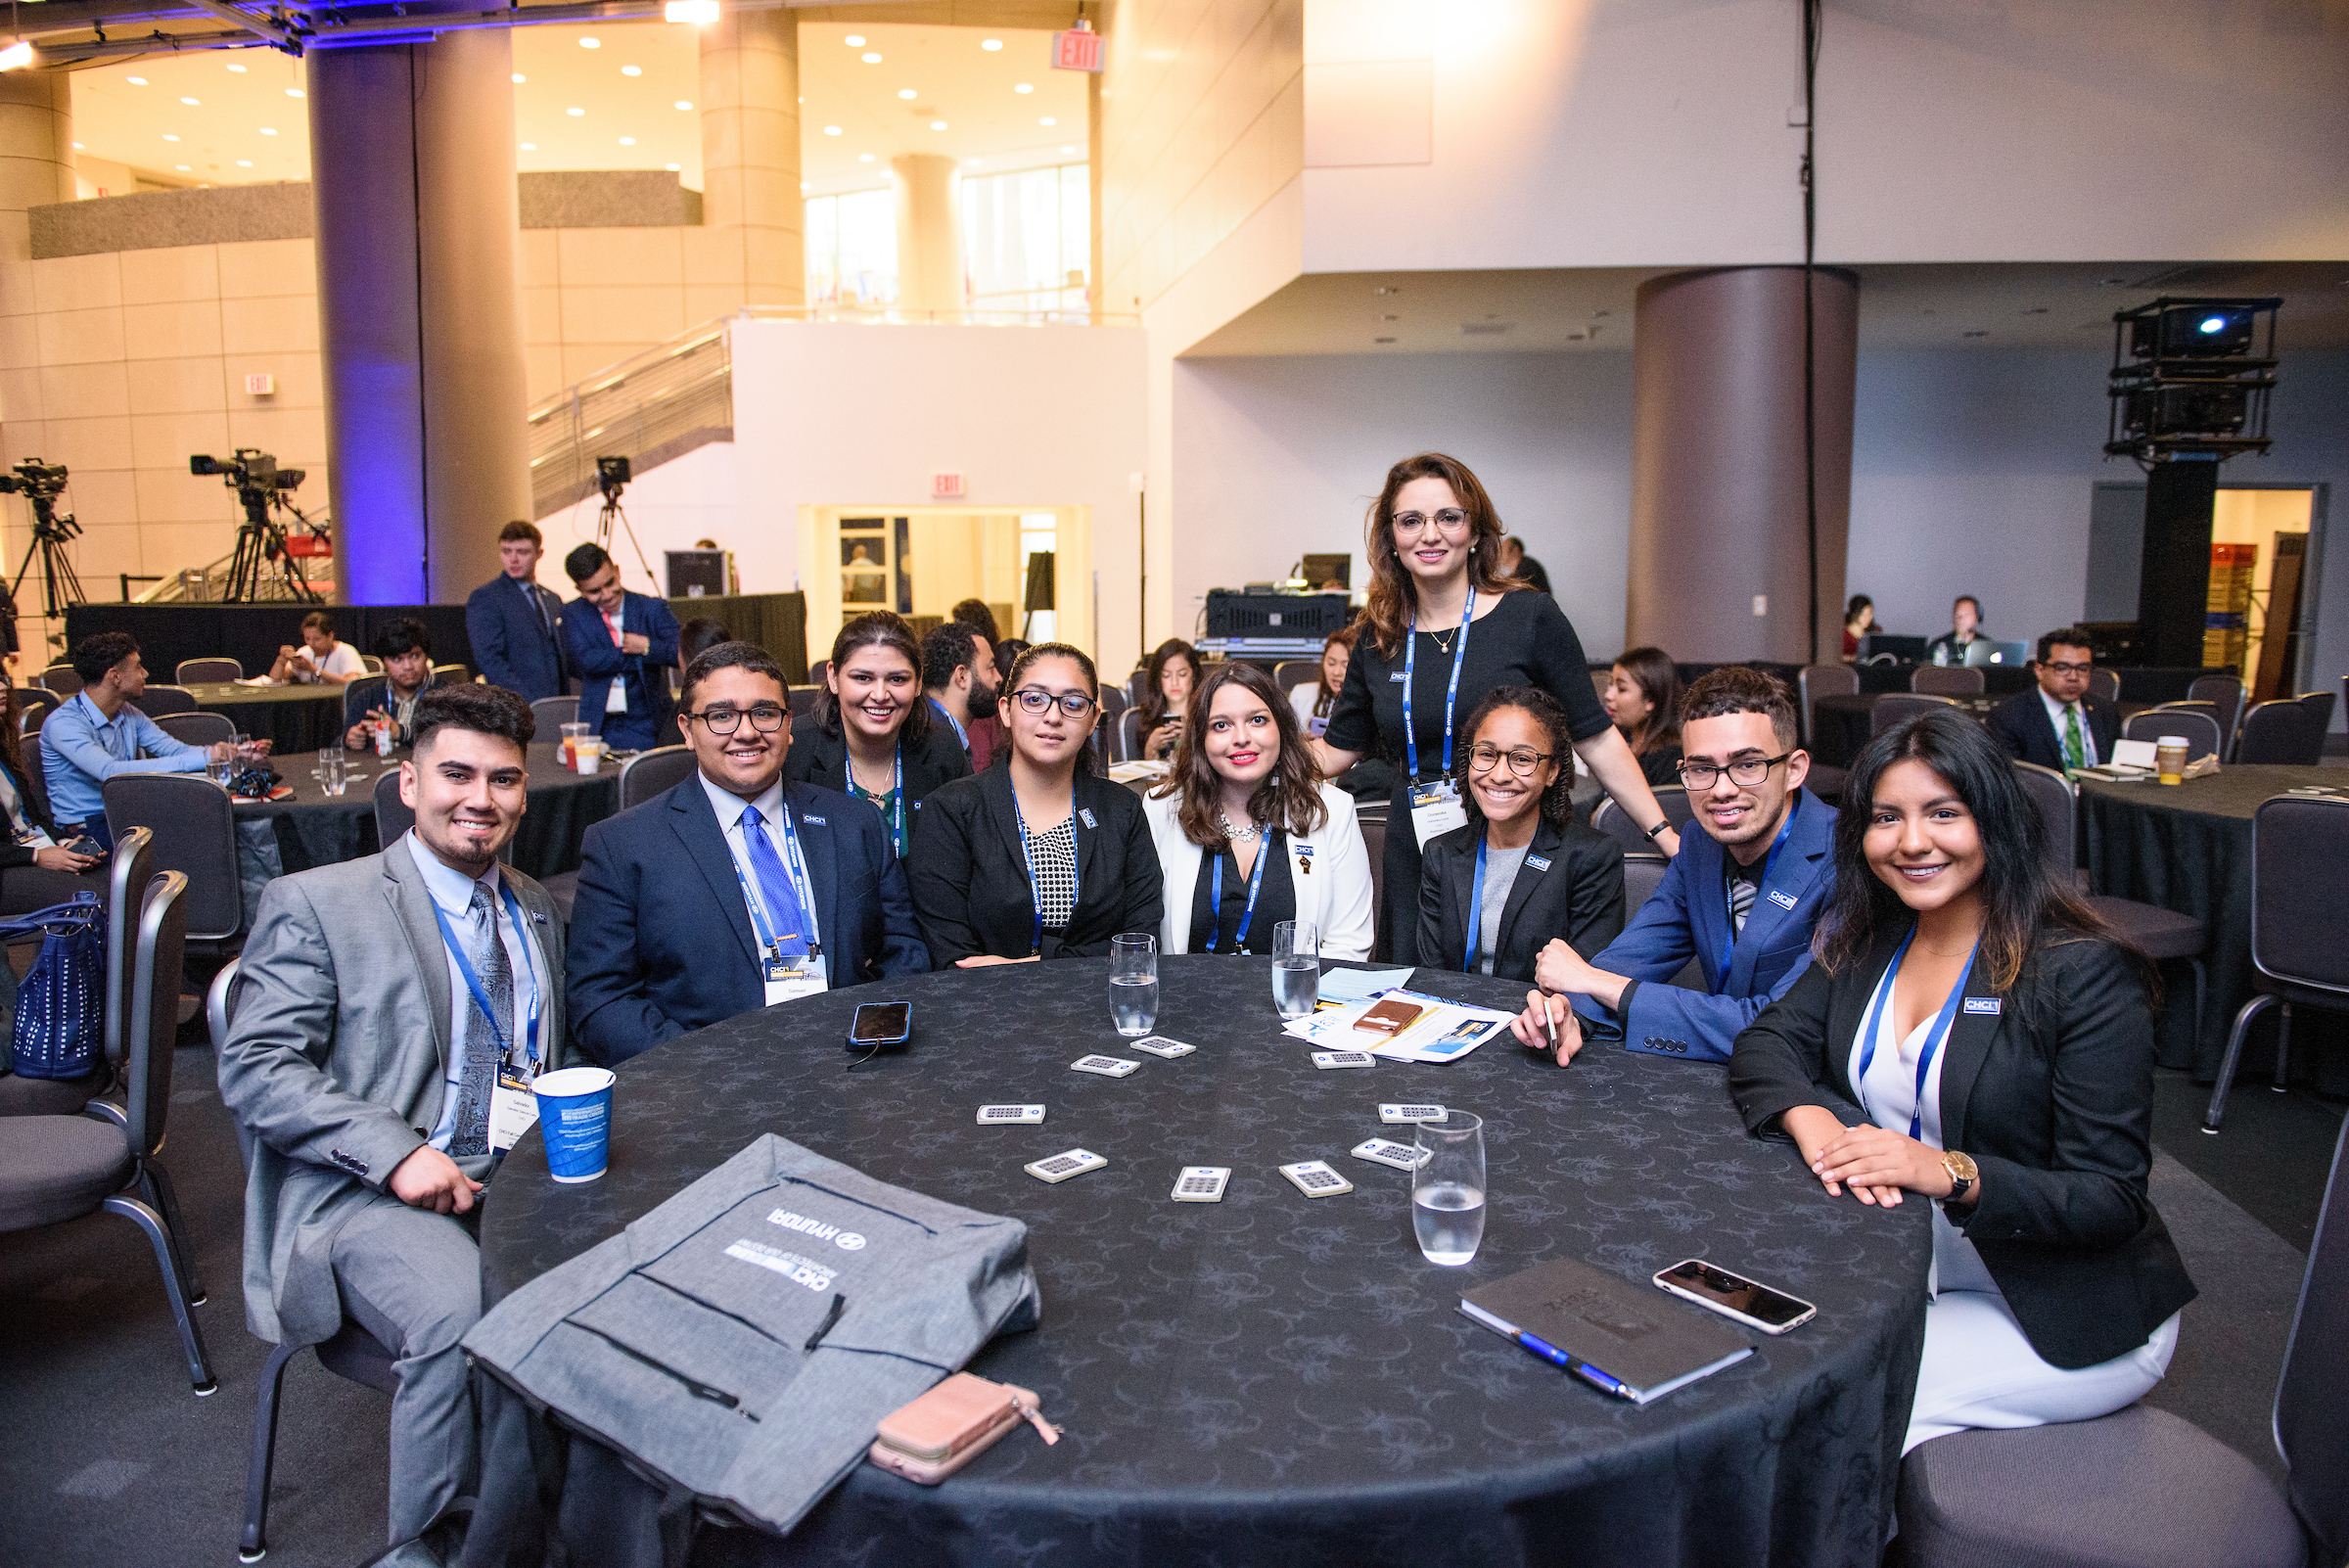 CHCI Leadership Conference on September 11th, 2018.